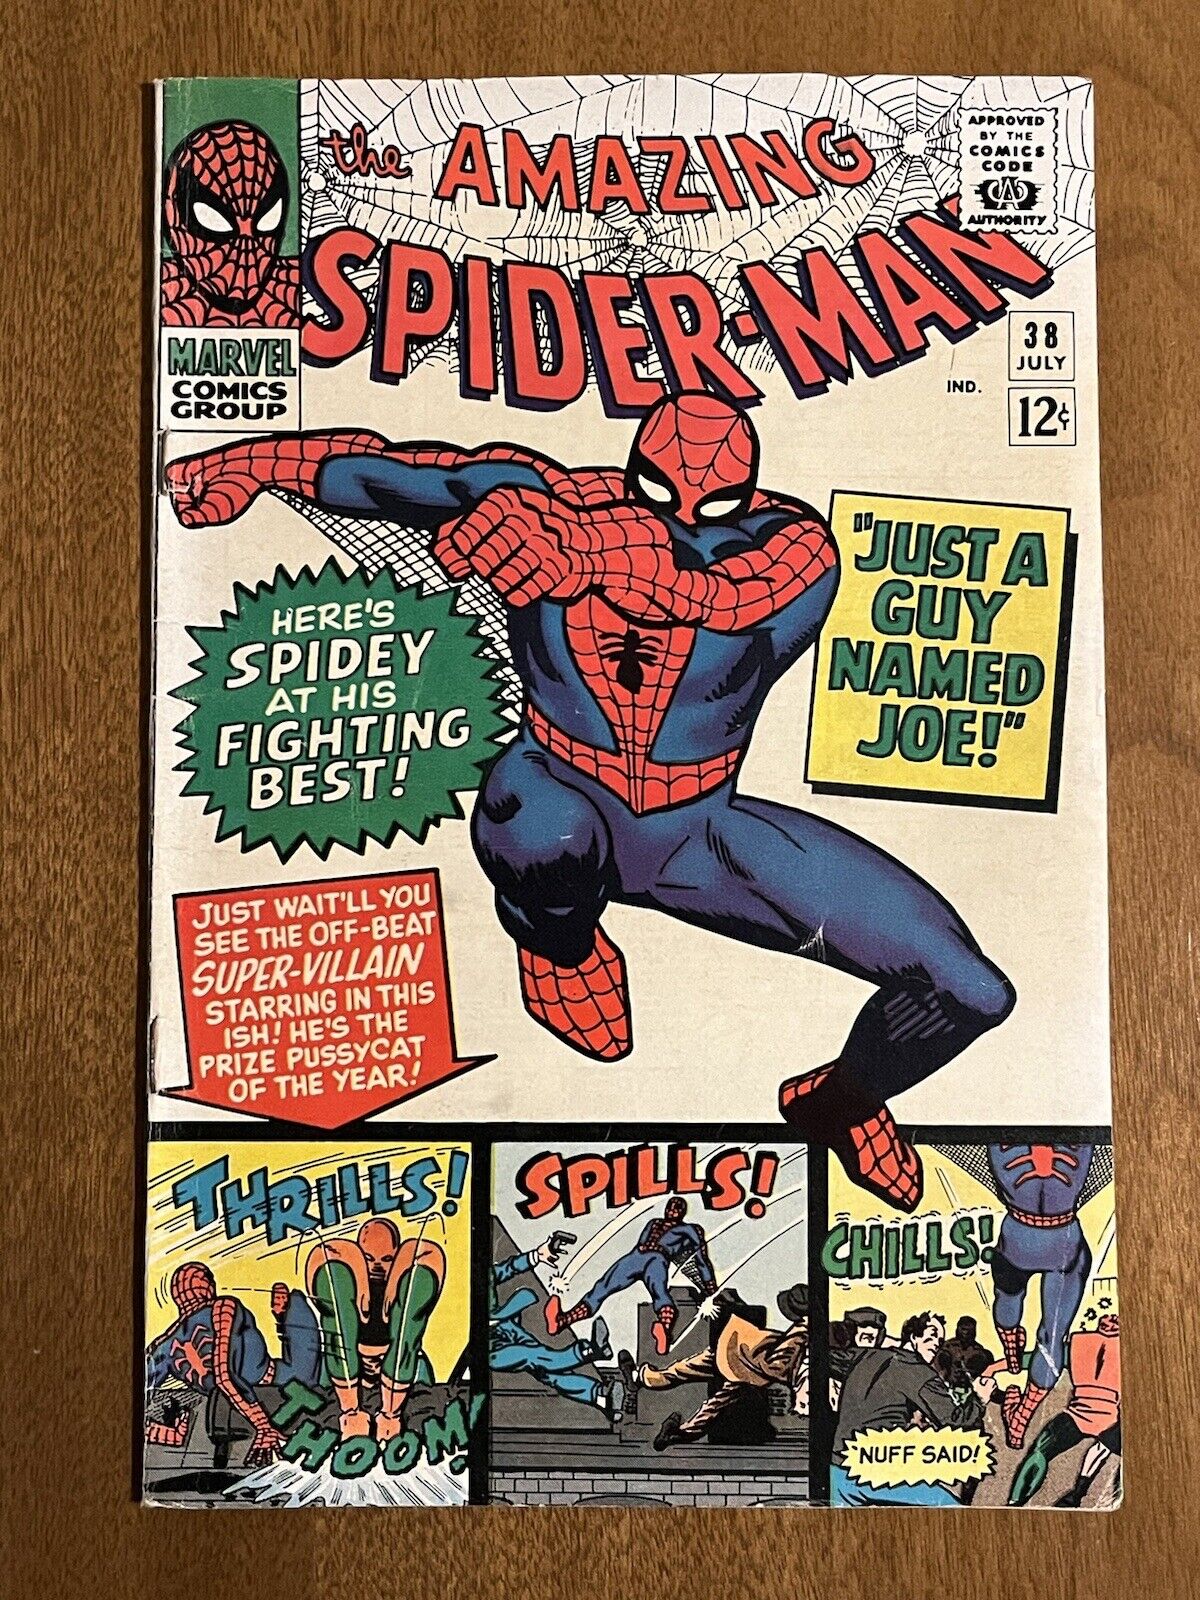 The Amazing Spider-Man #38/Silver Age Marvel Comic Book/Last Ditko Art/FN